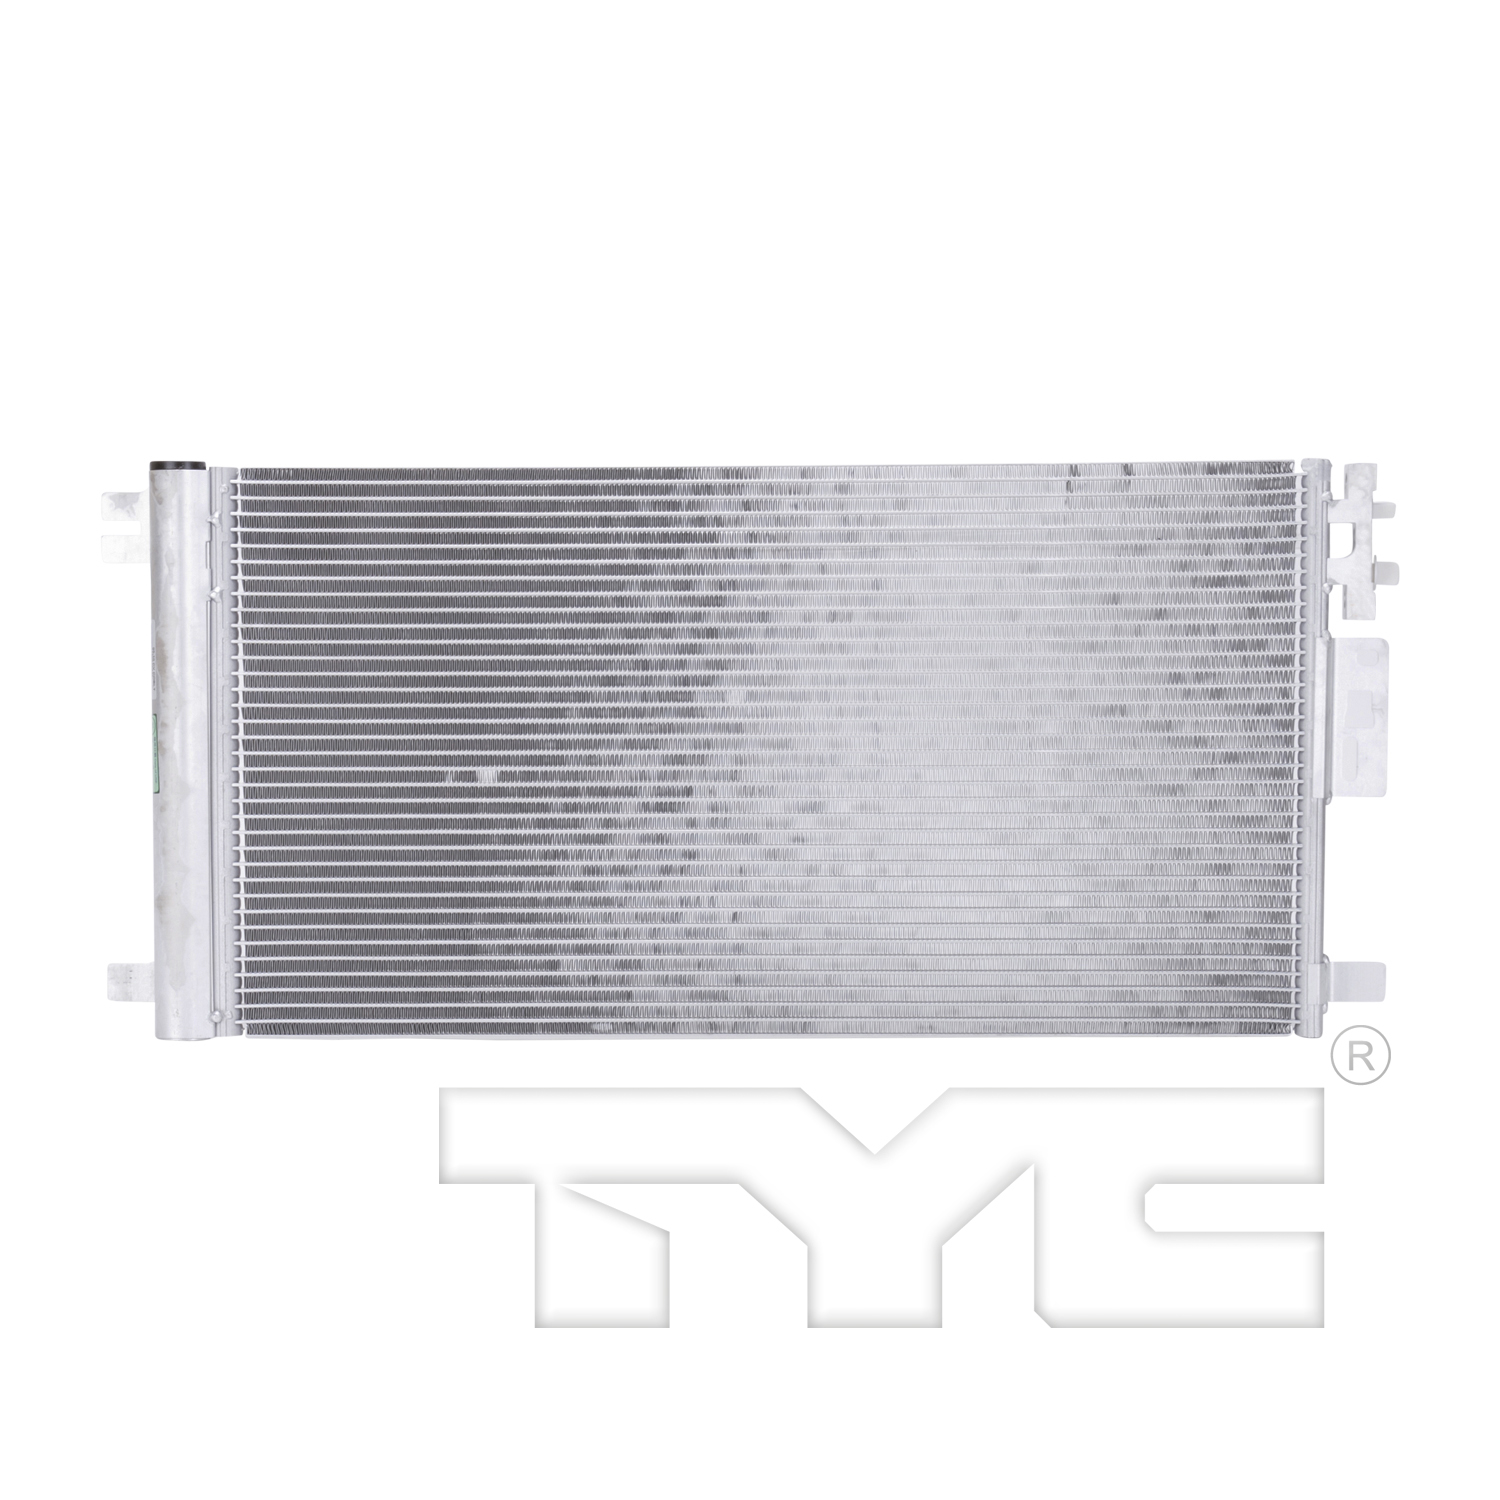 Aftermarket AC CONDENSERS for PONTIAC - G5, G5,07-09,Air conditioning condenser